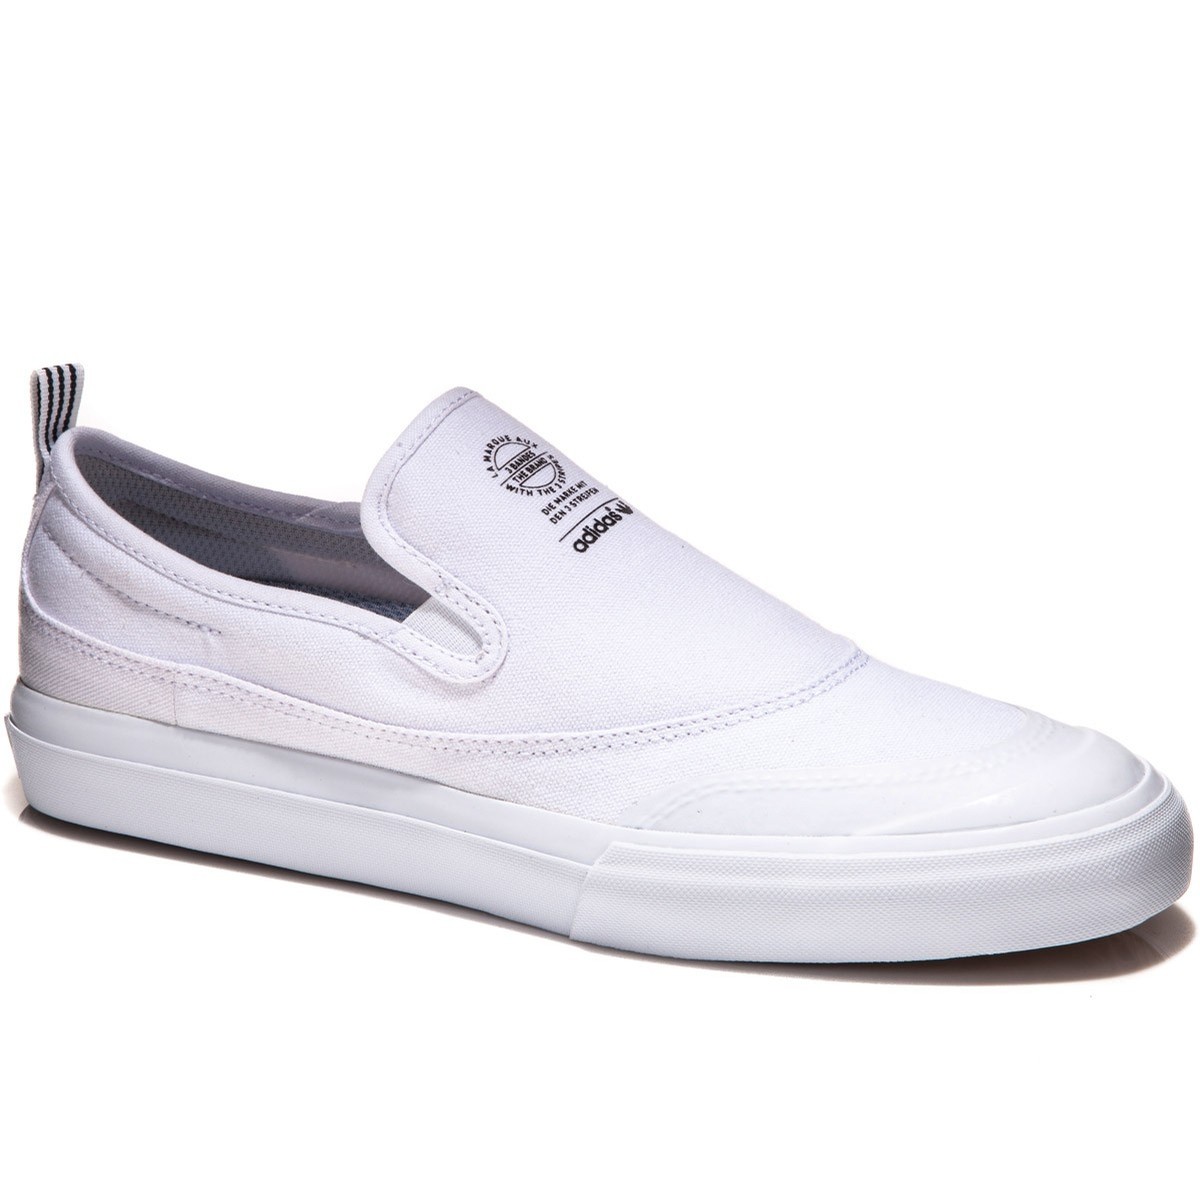 white leather slip on sneakers mens